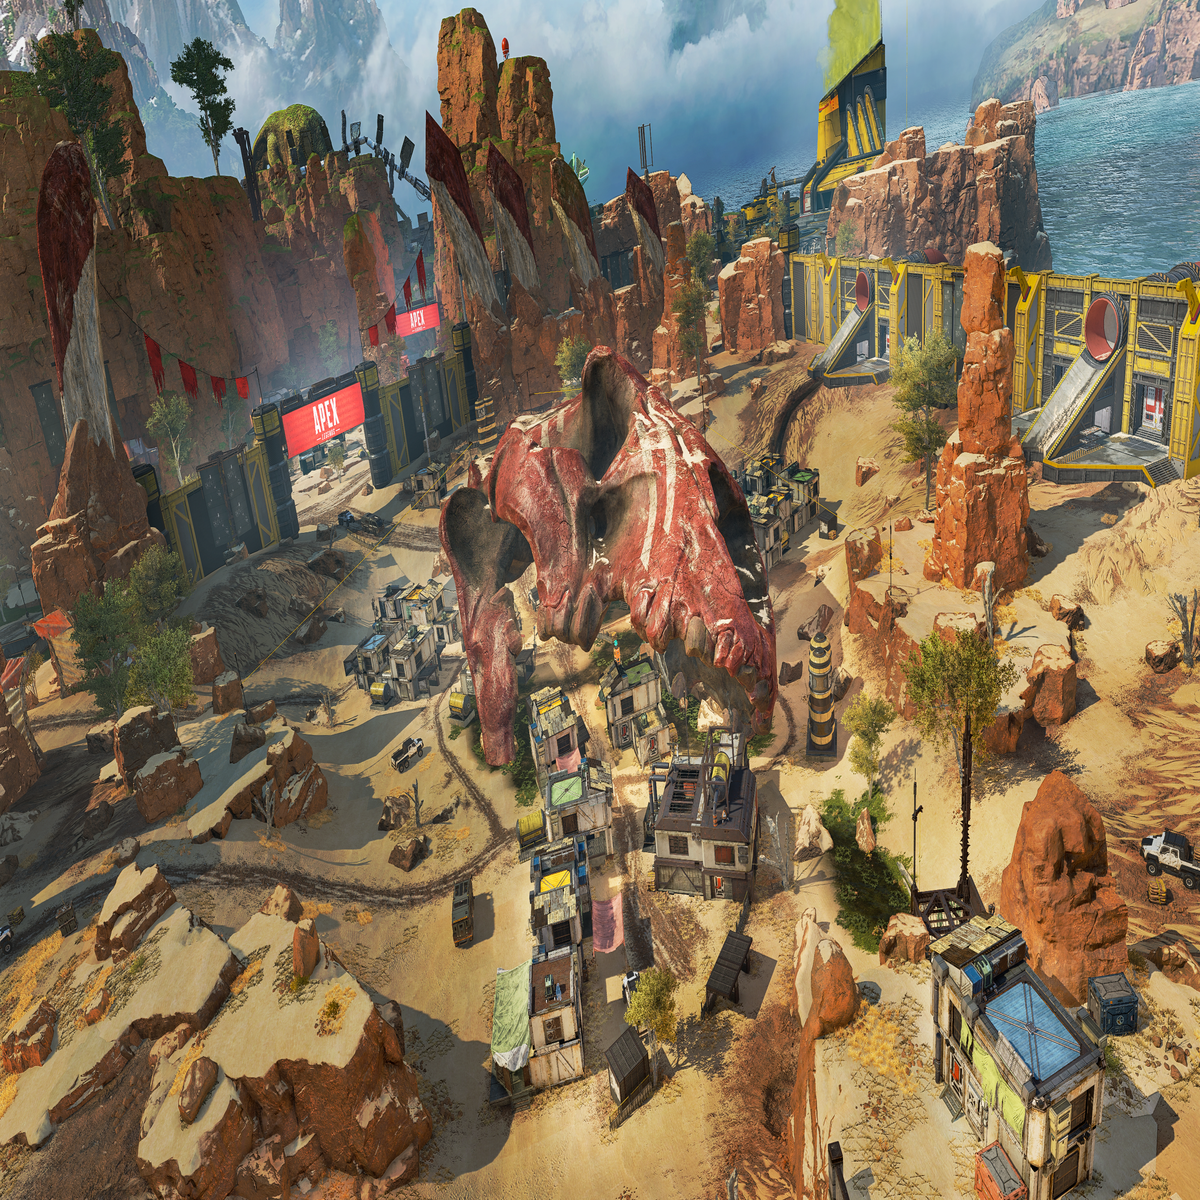 Why is Apex Legends cross-progression not working? 